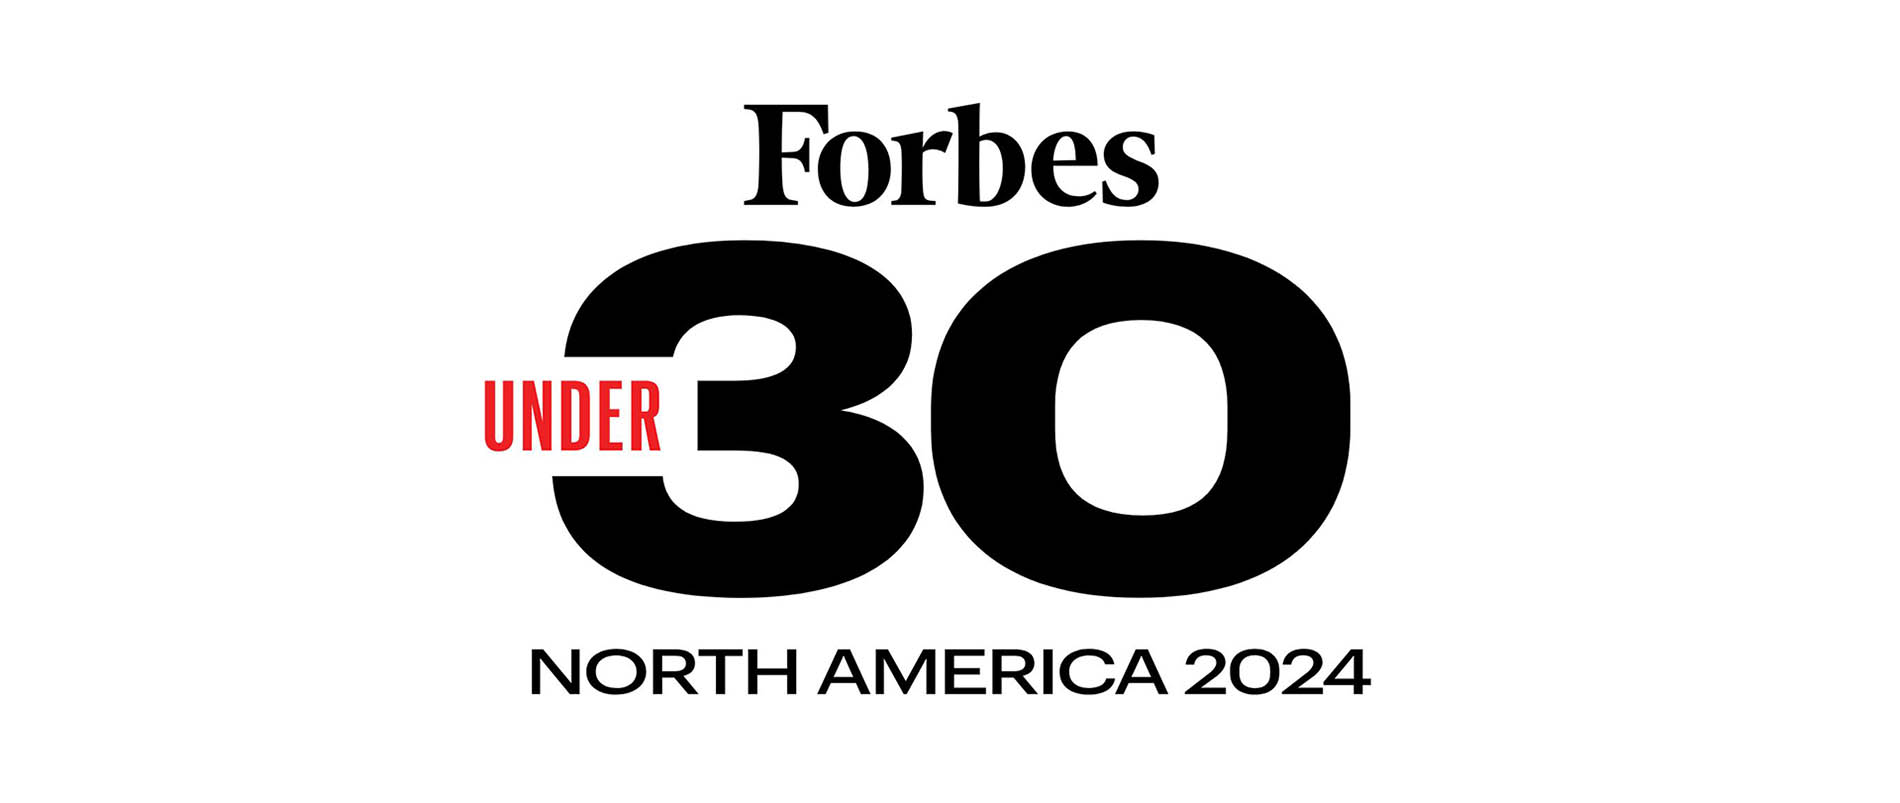 Forbes 30 Under 30 North America 2024